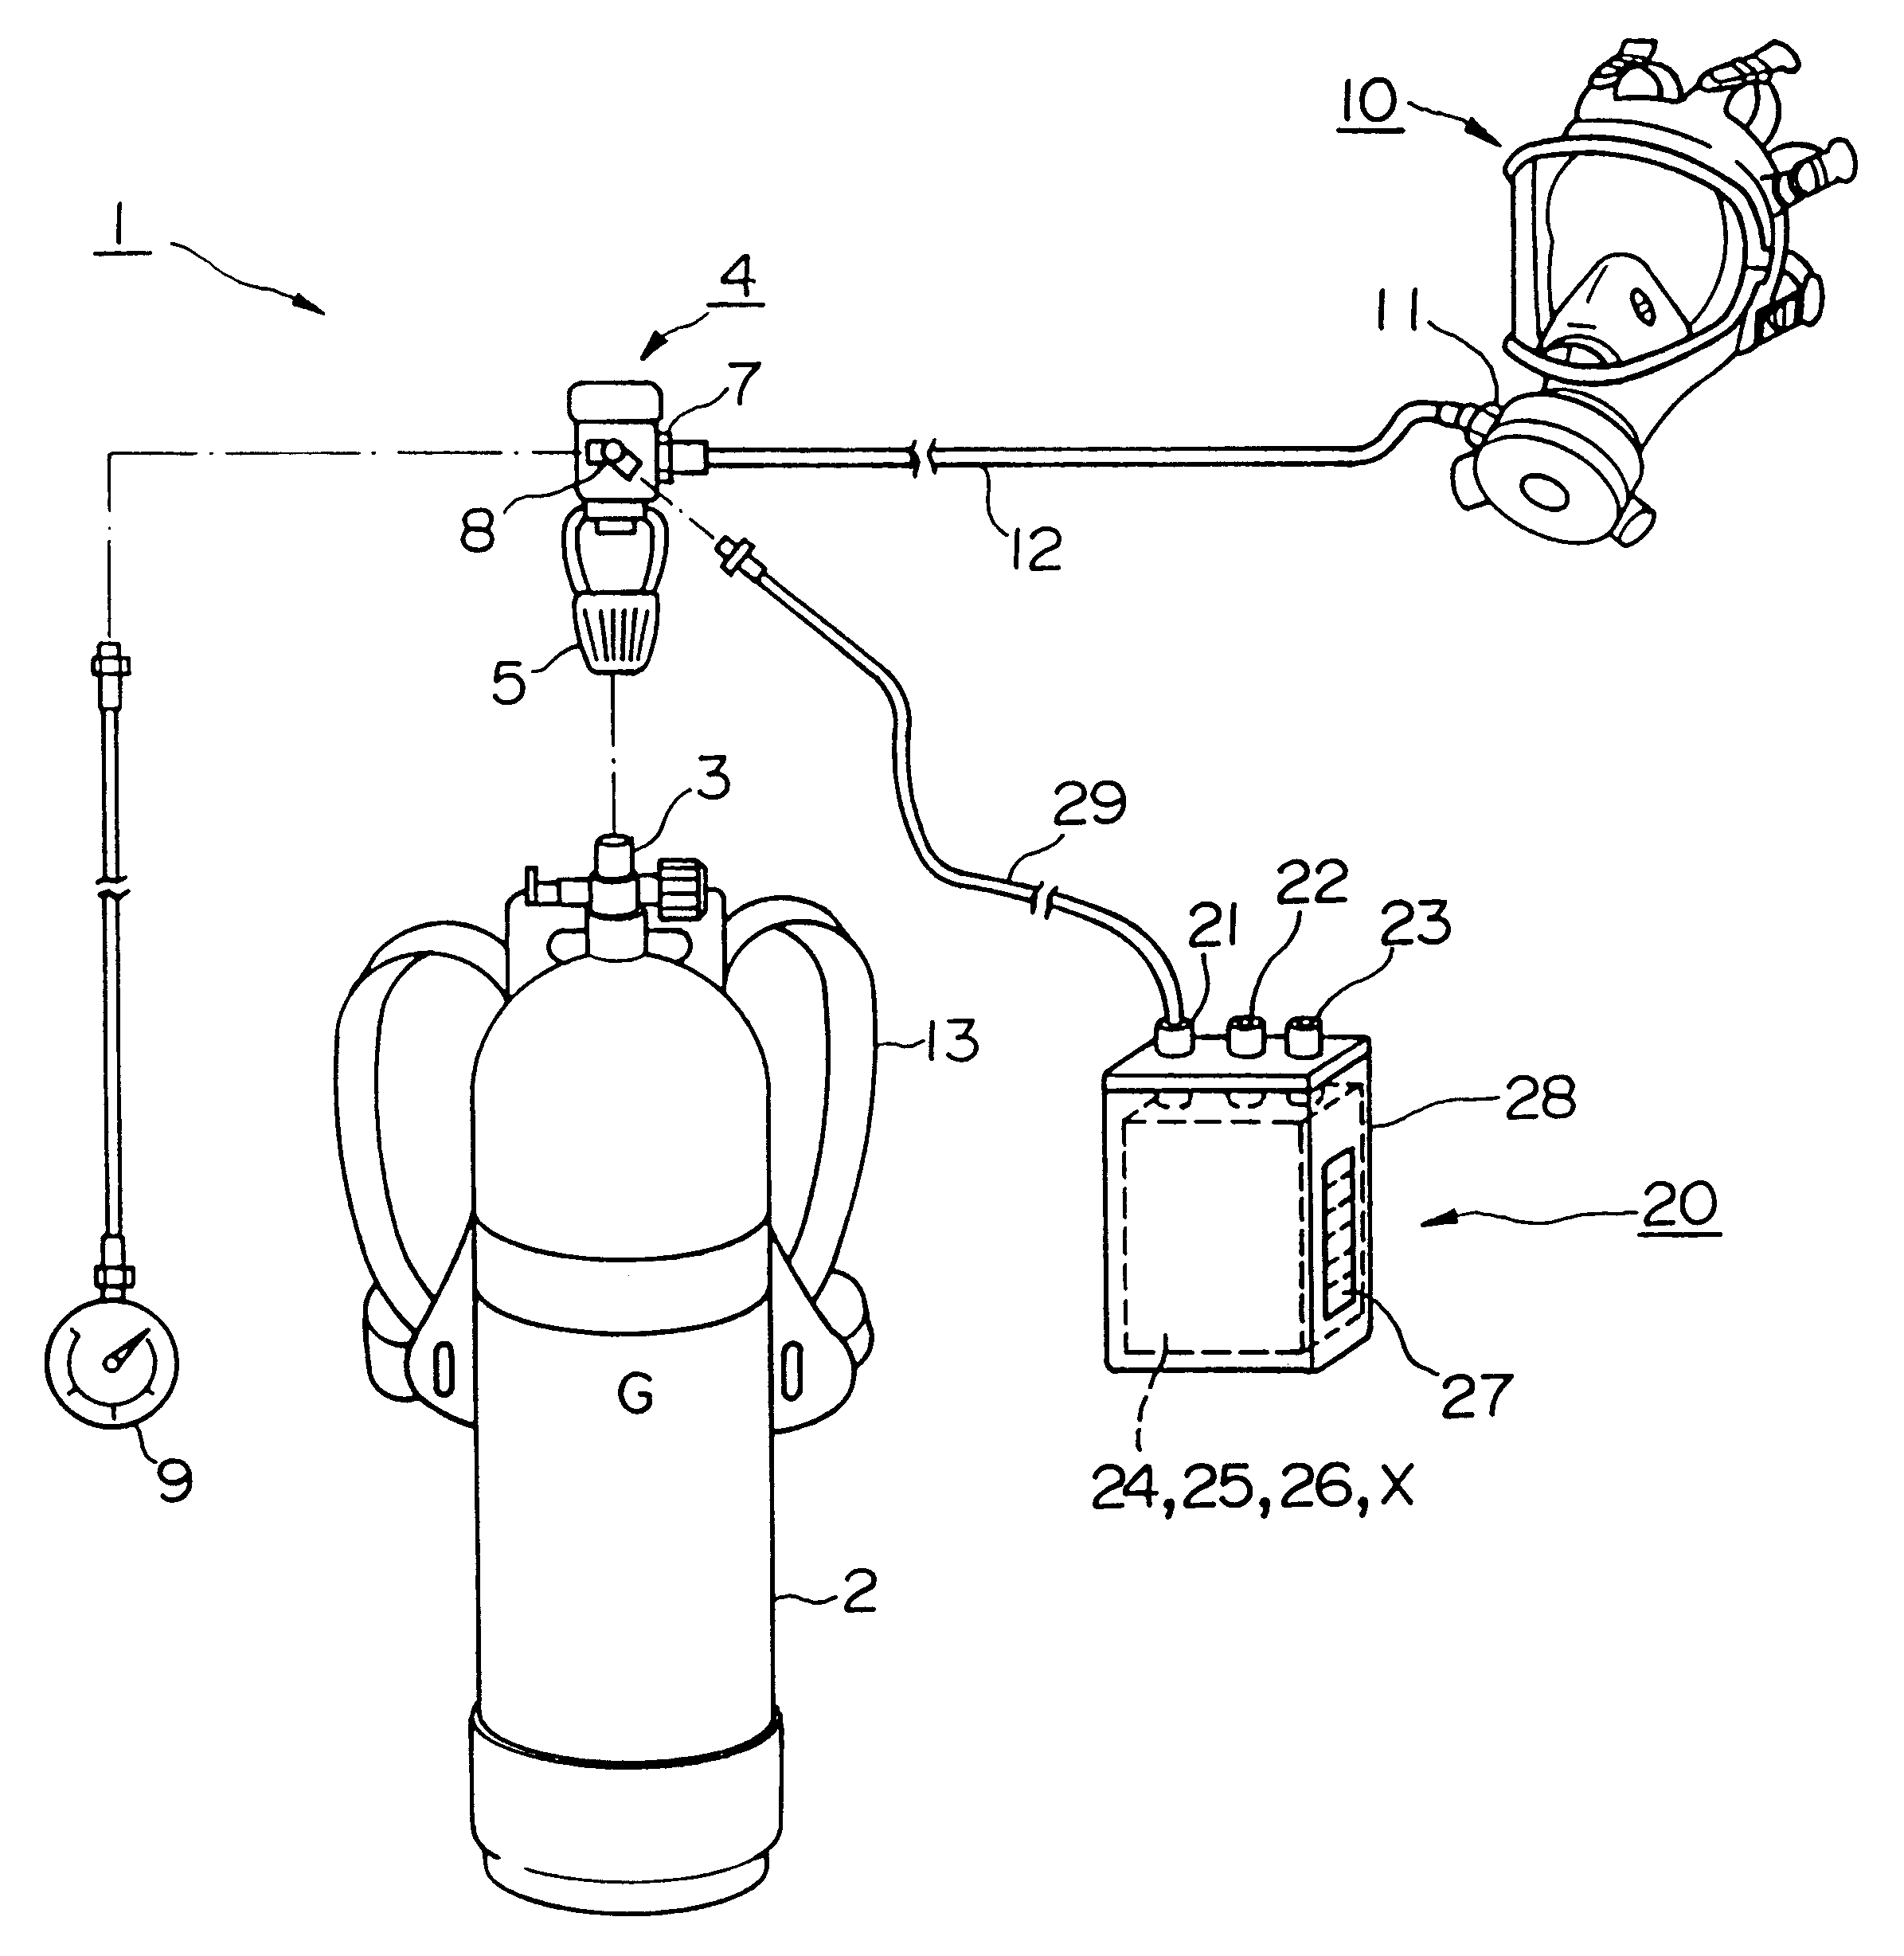 Respiratory gas consumption monitoring device and monitoring method